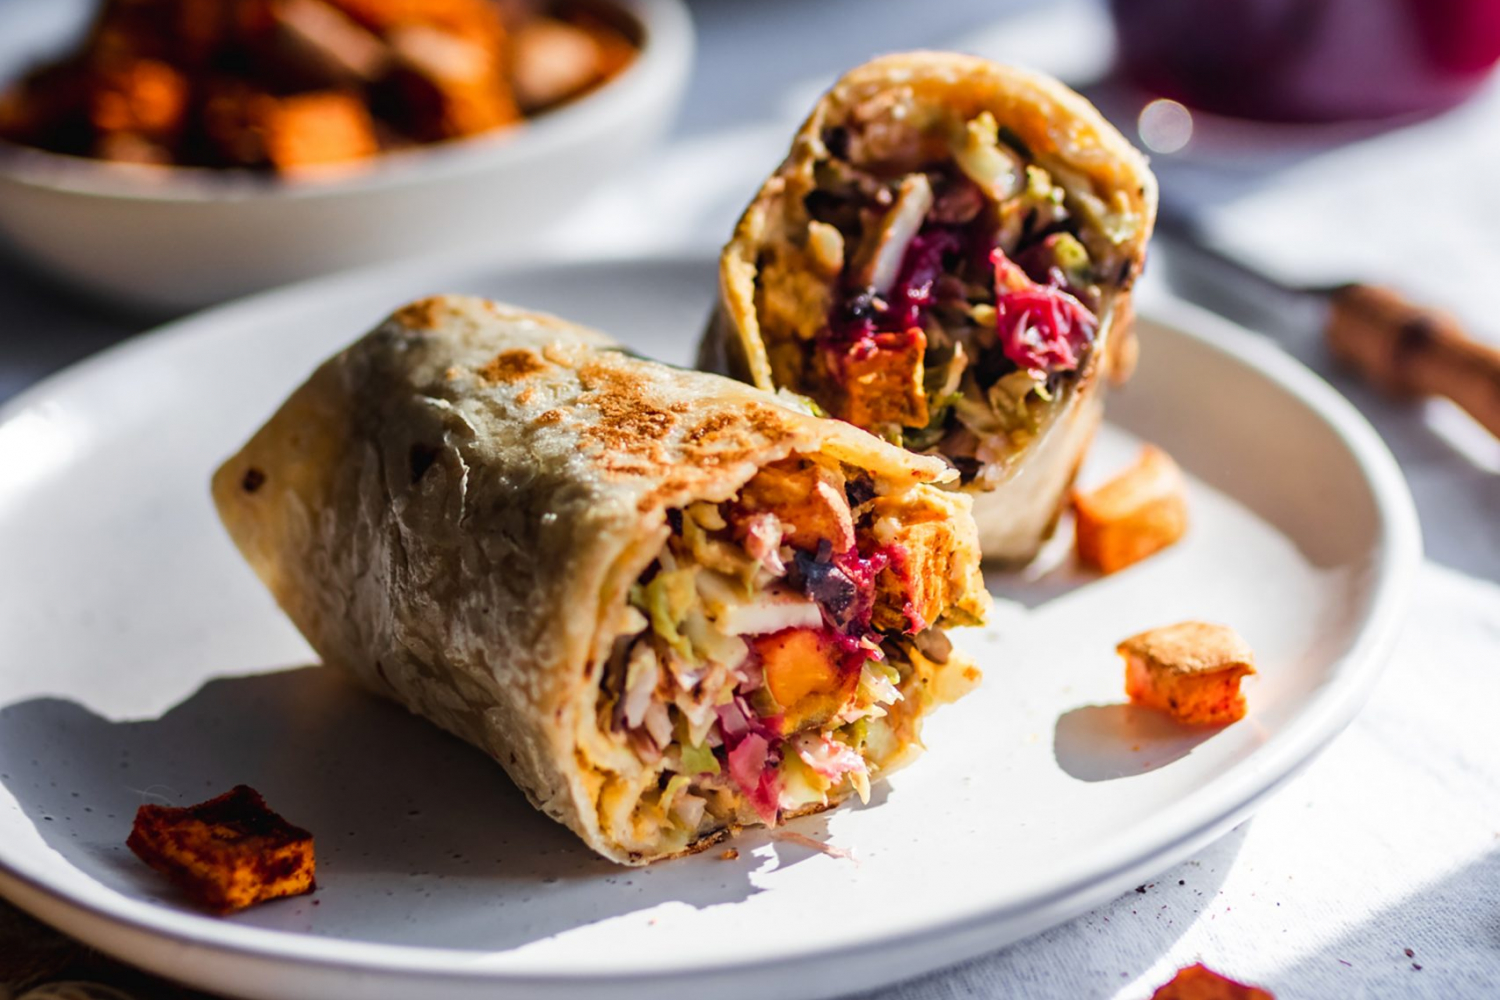 Vegan wrap cut in half, stuffed with squash, brussels sprouts, cranberries, sweet potatoes page-recipe-item apples